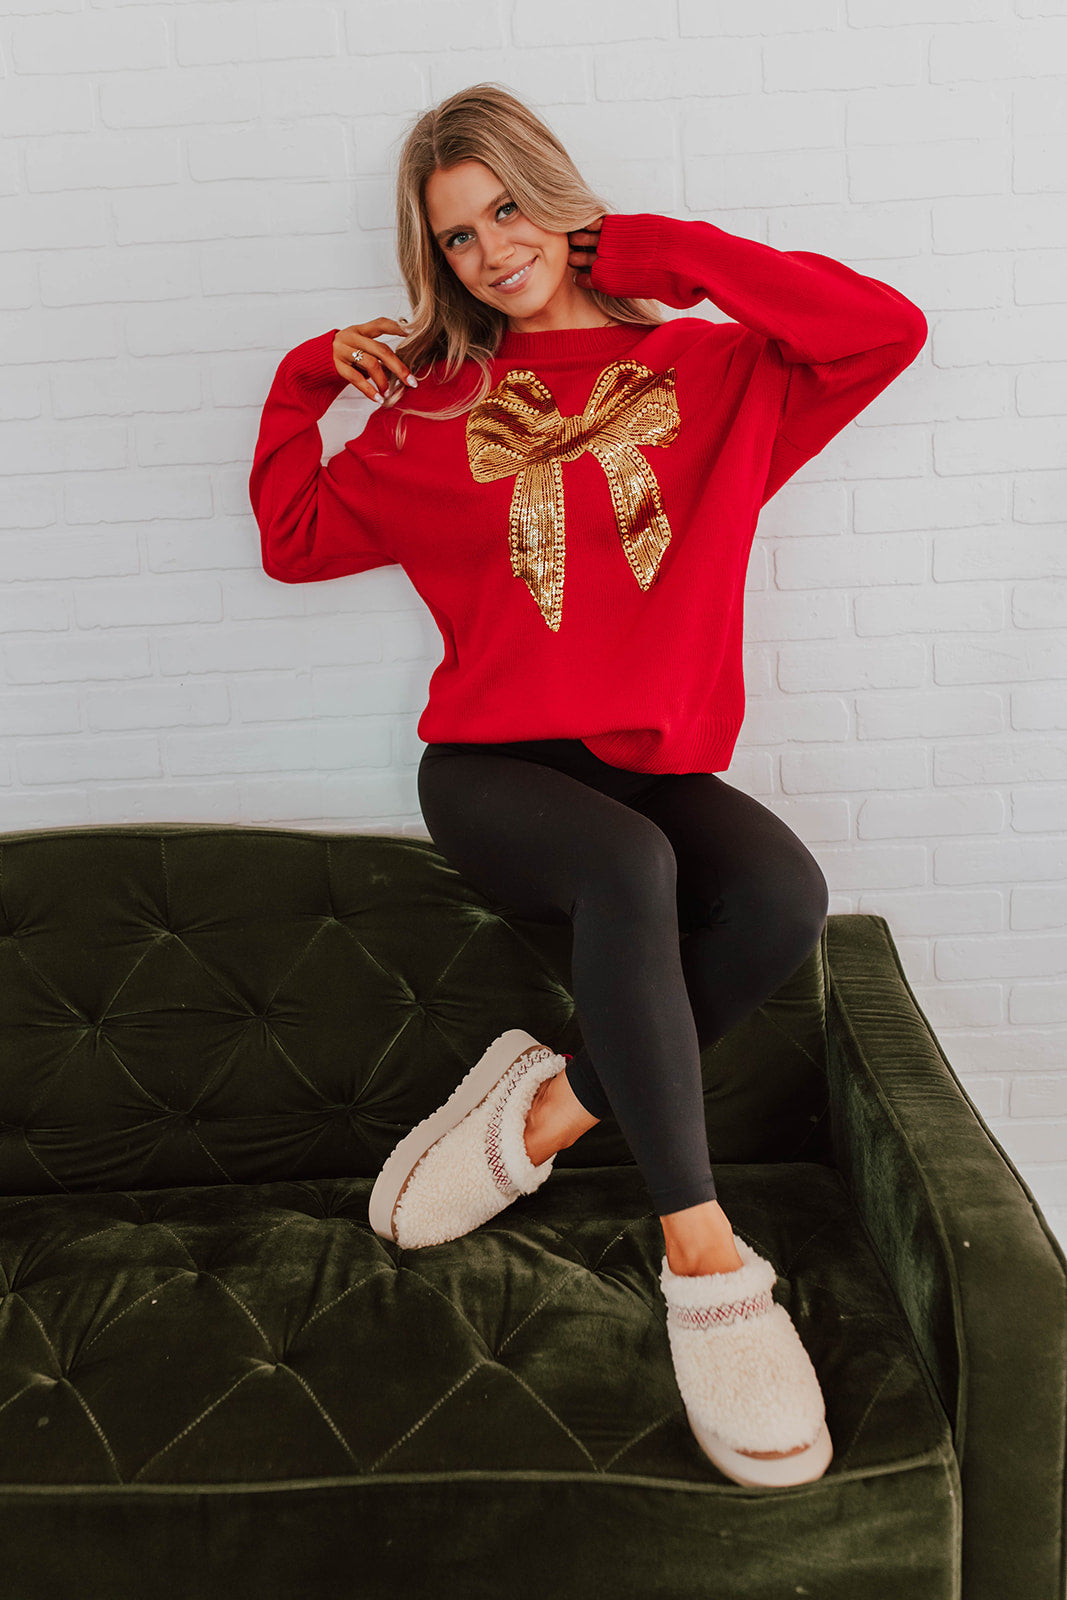 THE SEASON OF GIVING SWEATER IN RED